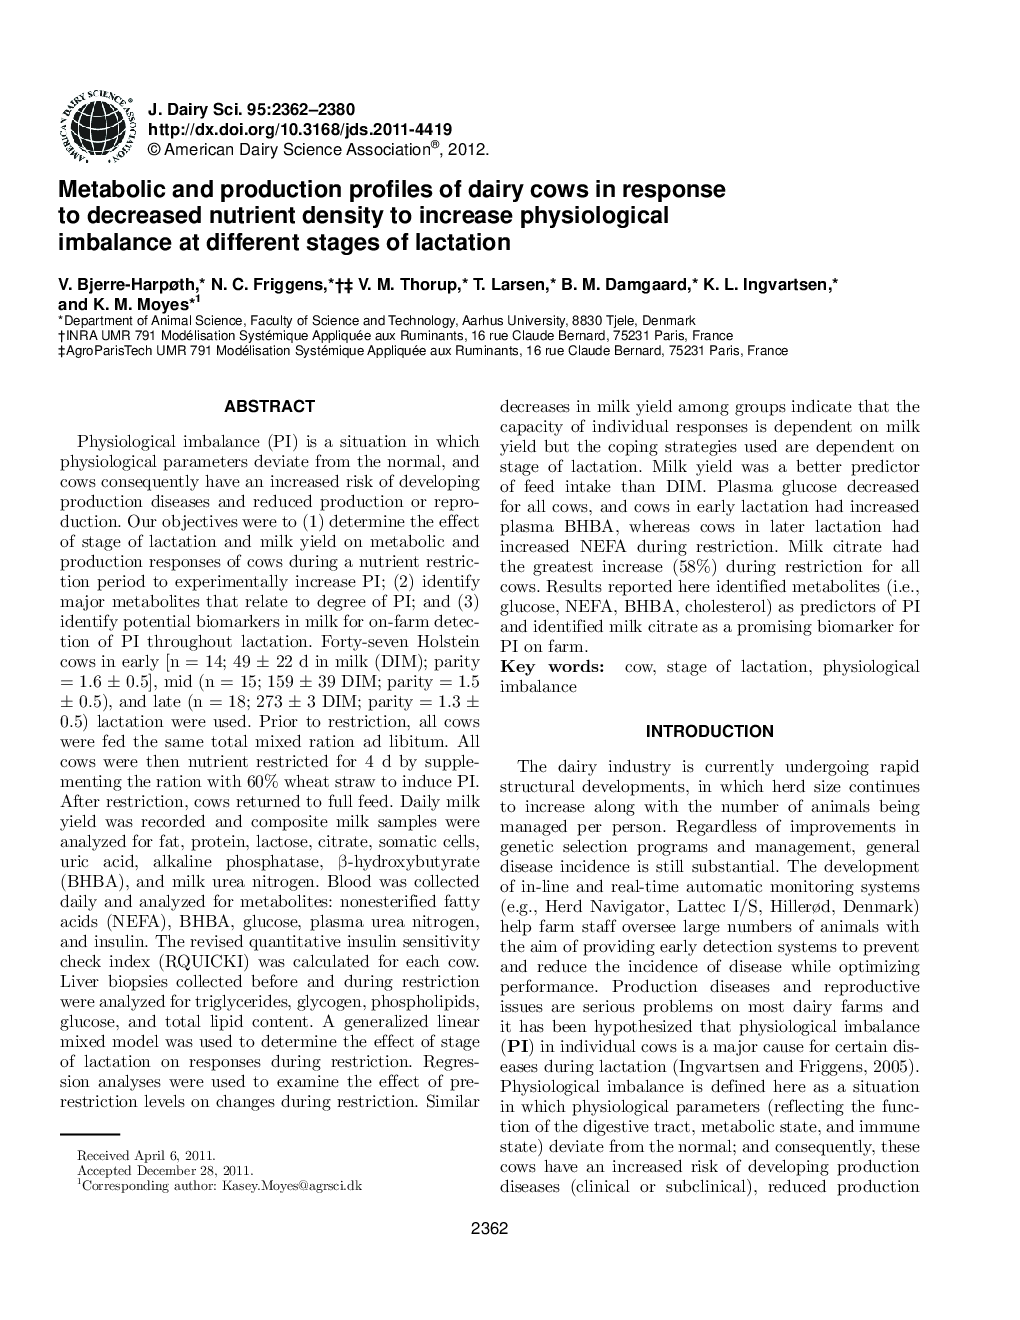 Metabolic and production profiles of dairy cows in response to decreased nutrient density to increase physiological imbalance at different stages of lactation